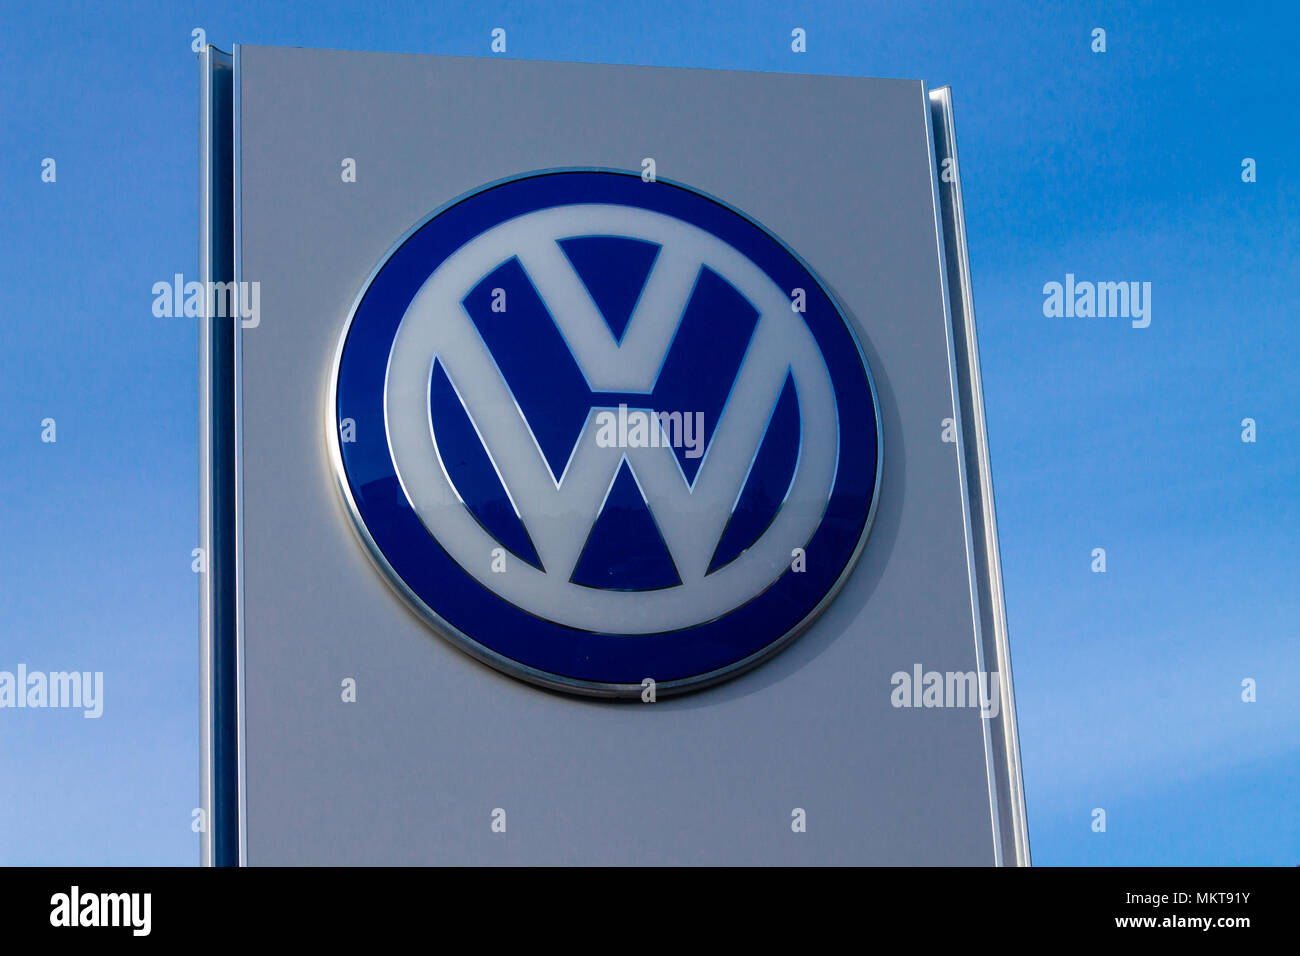 Volkswagen logo a german car manufacture company logo or badge standing out against a bright blue evening sky. Stock Photo